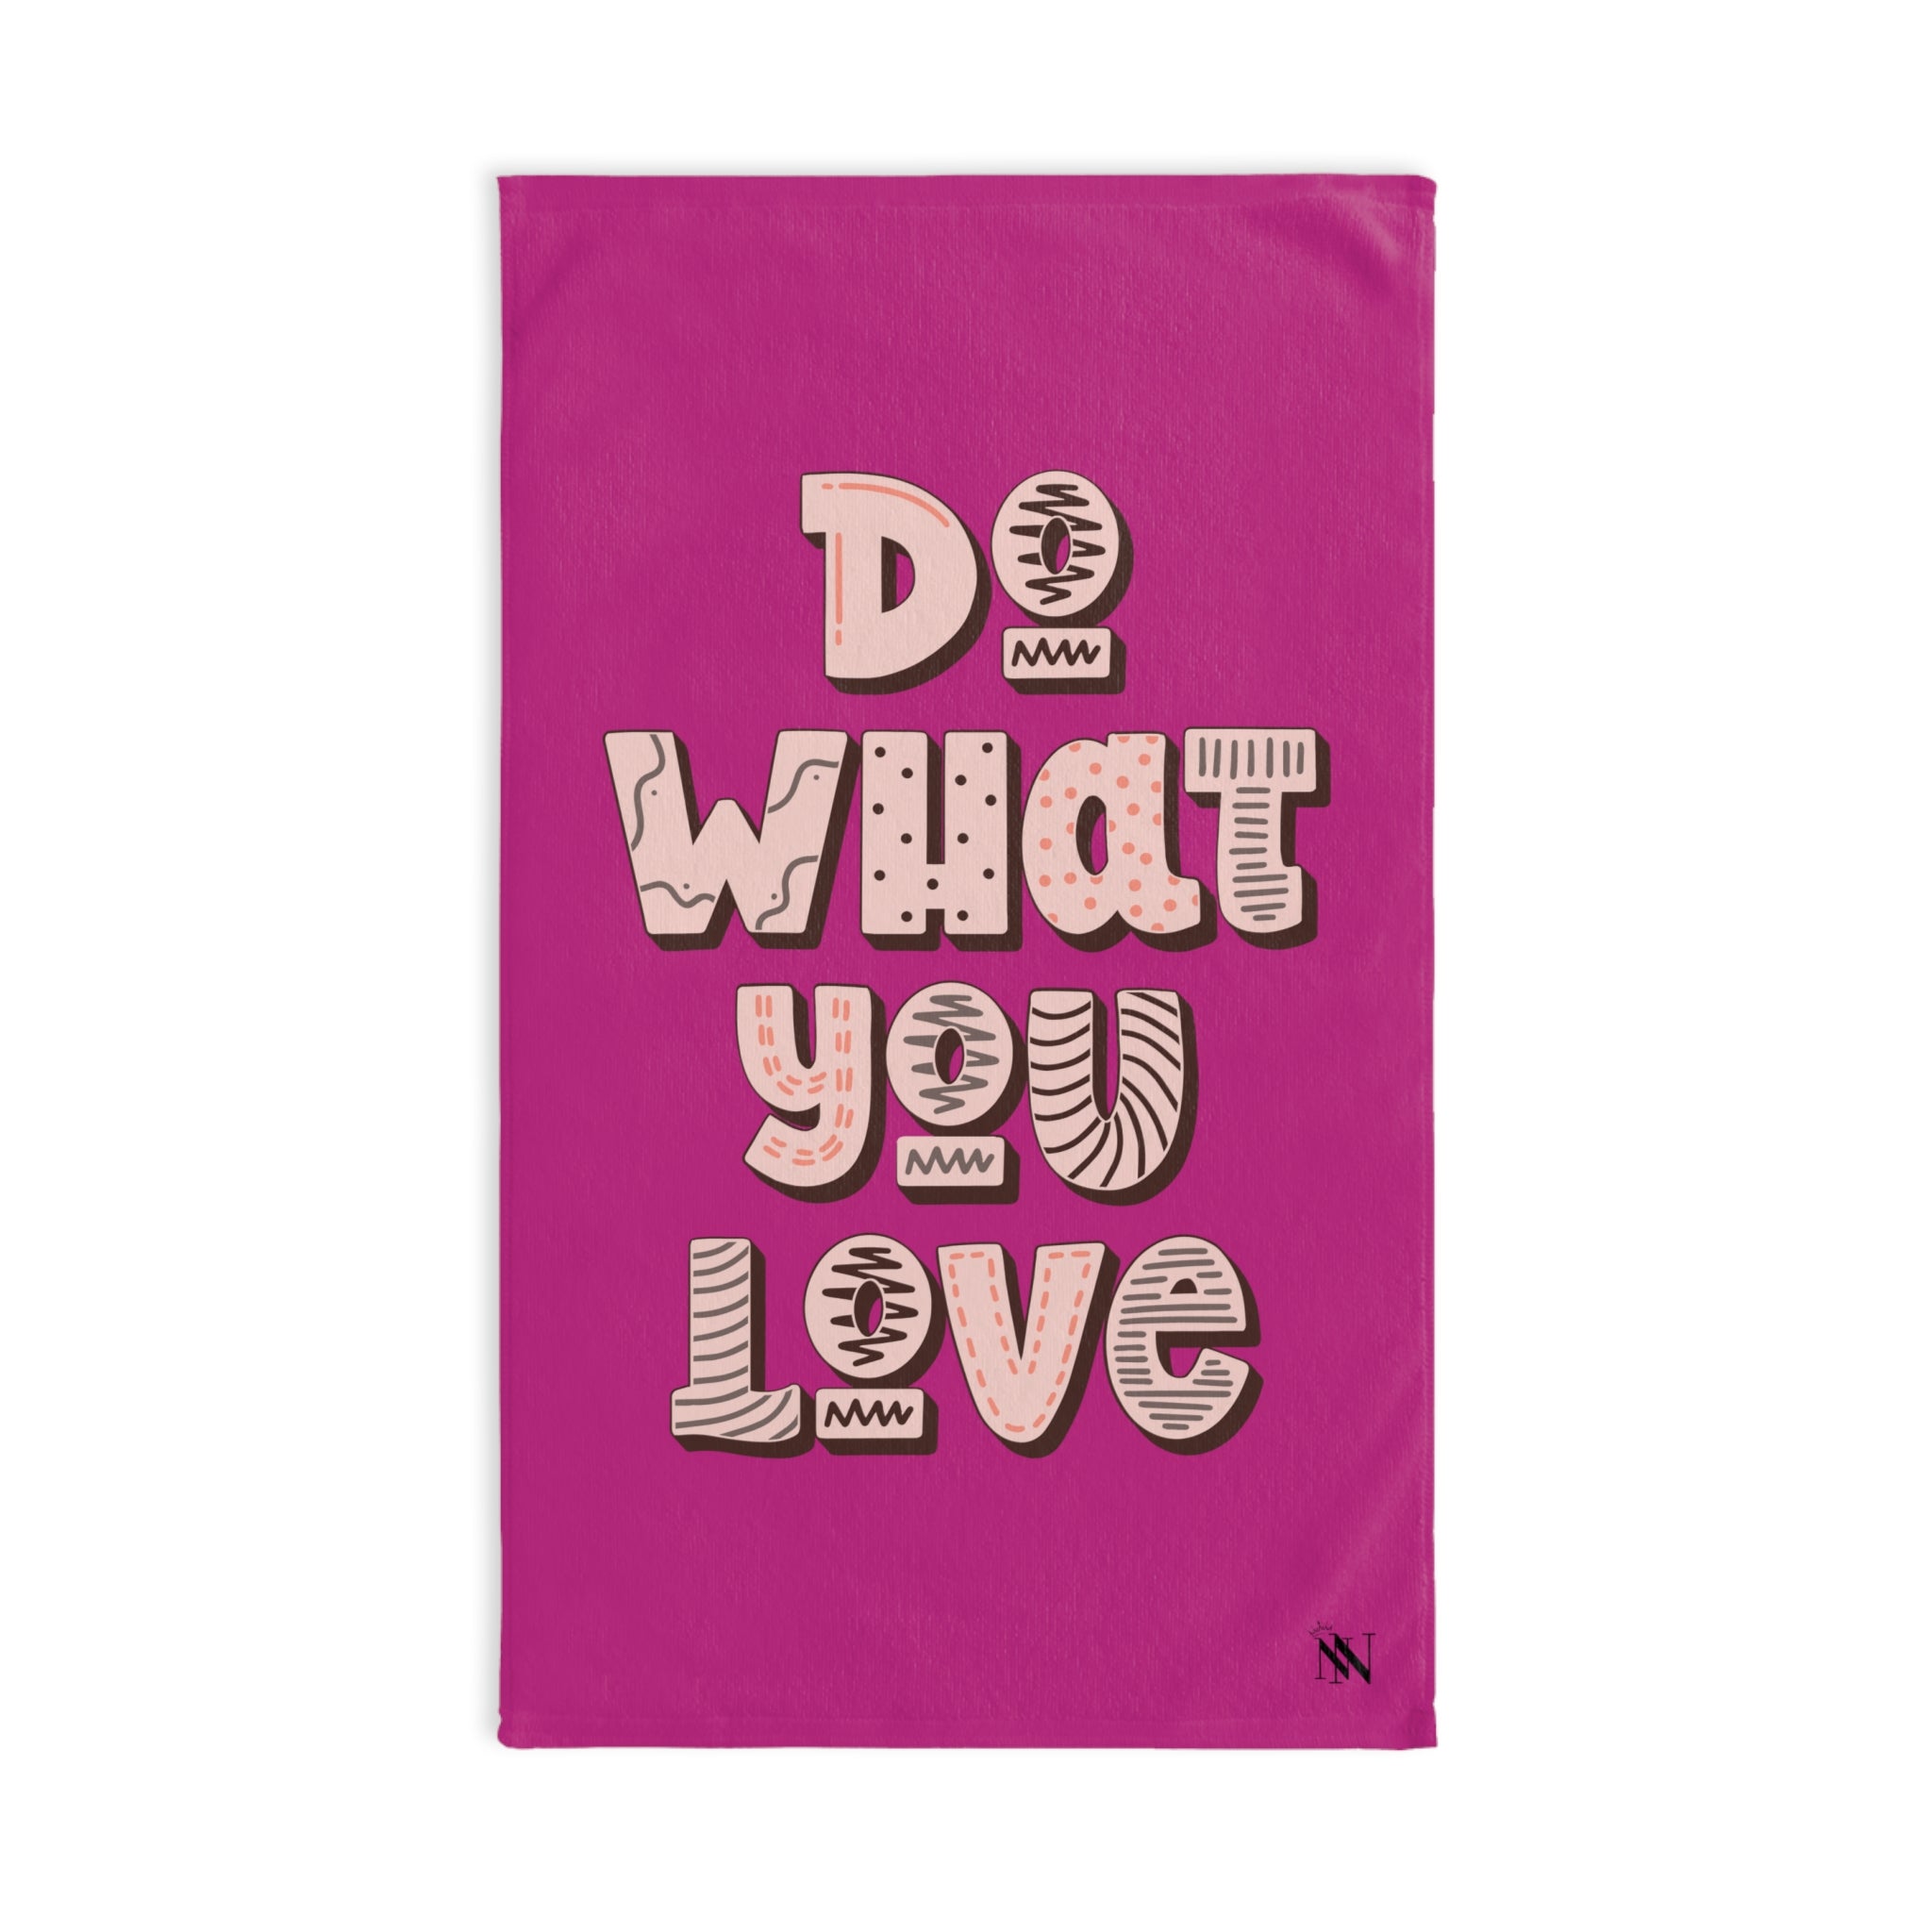 What DO Love You Fuscia | Funny Gifts for Men - Gifts for Him - Birthday Gifts for Men, Him, Husband, Boyfriend, New Couple Gifts, Fathers & Valentines Day Gifts, Hand Towels NECTAR NAPKINS